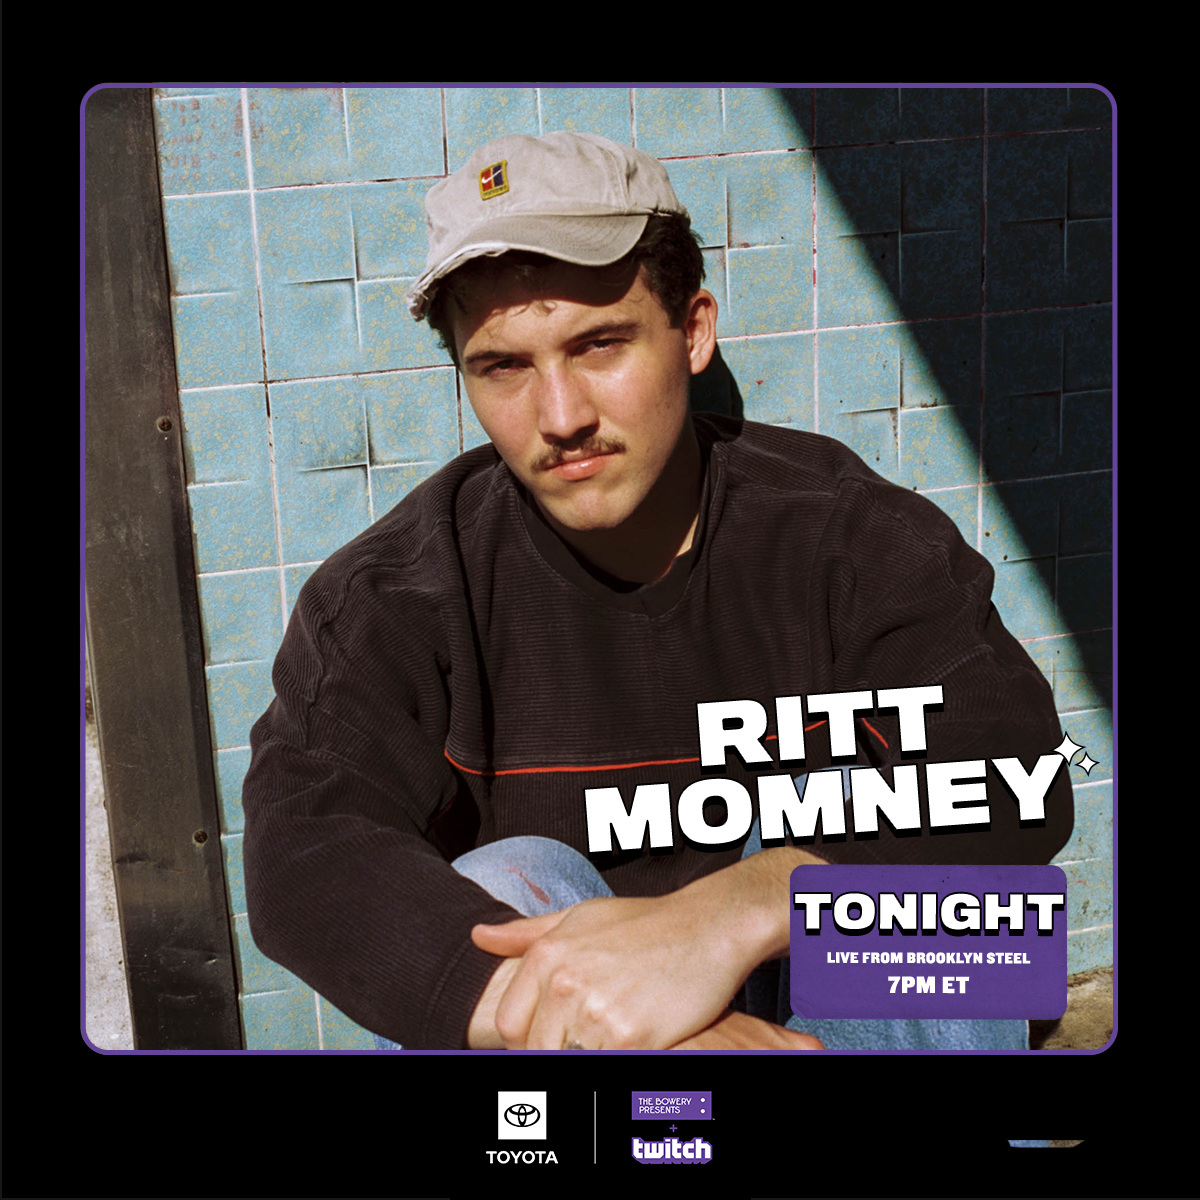 tonight live from @brooklynsteel ✨ @rittmomney performs on @bowerypresents' @Twitch at 7pm 💙 presented by @Toyota >> twitch.tv/bowerypresents